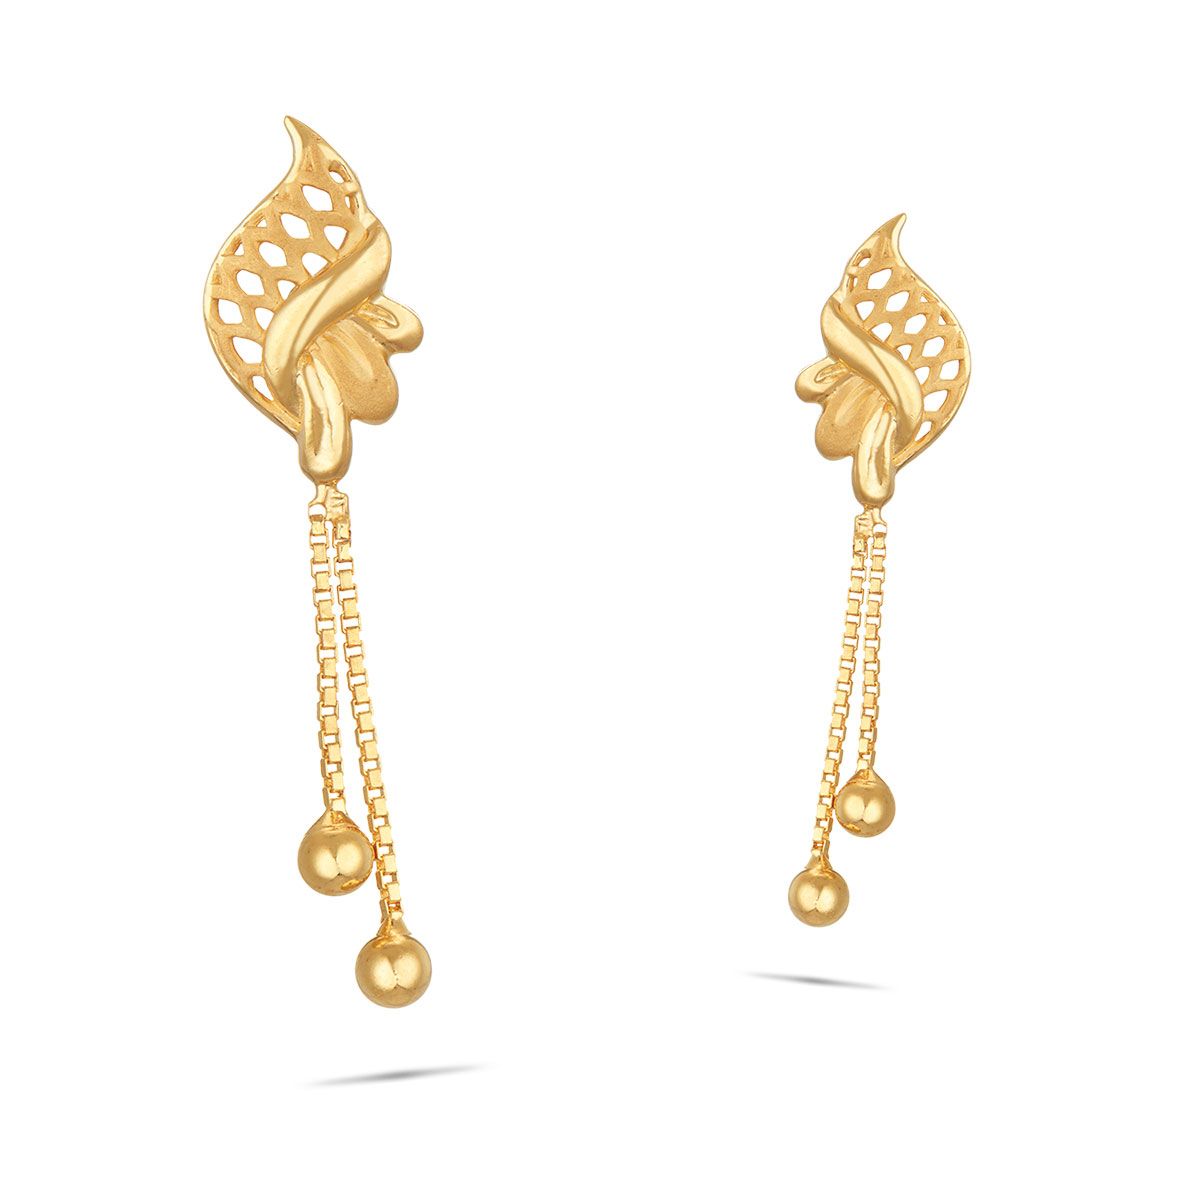 Tanishq 18 KT Yellow Gold Pearl Drop Earrings With R-Design